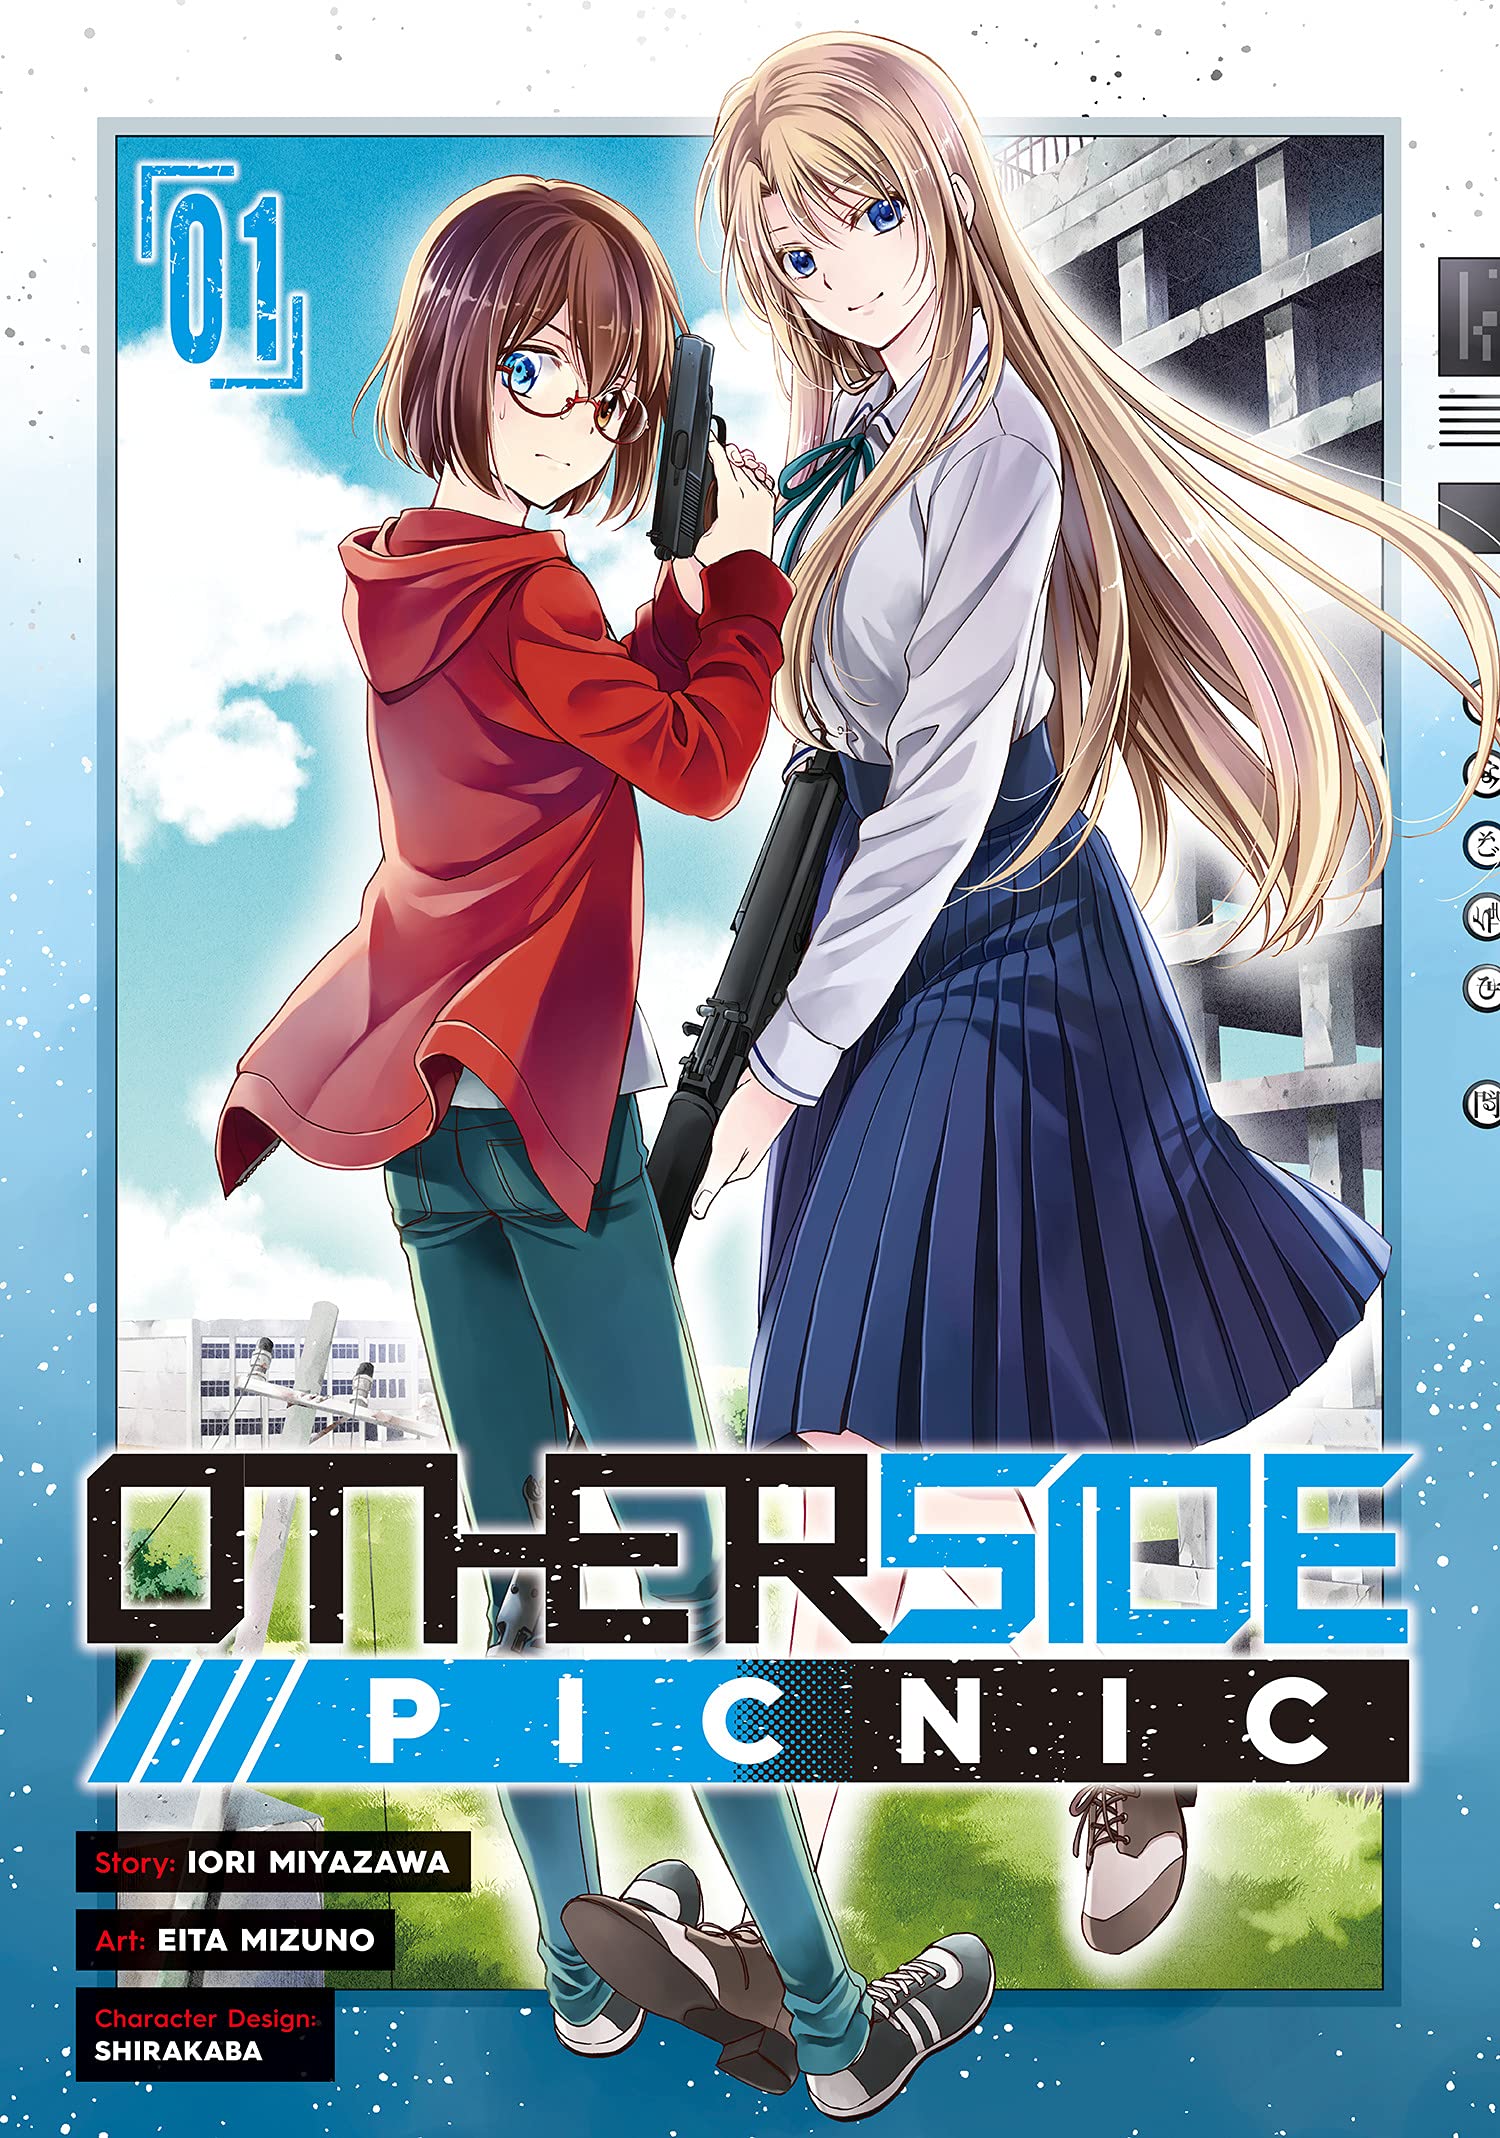 Otherside Picnic (ANIME) #1 [SPOILERS]